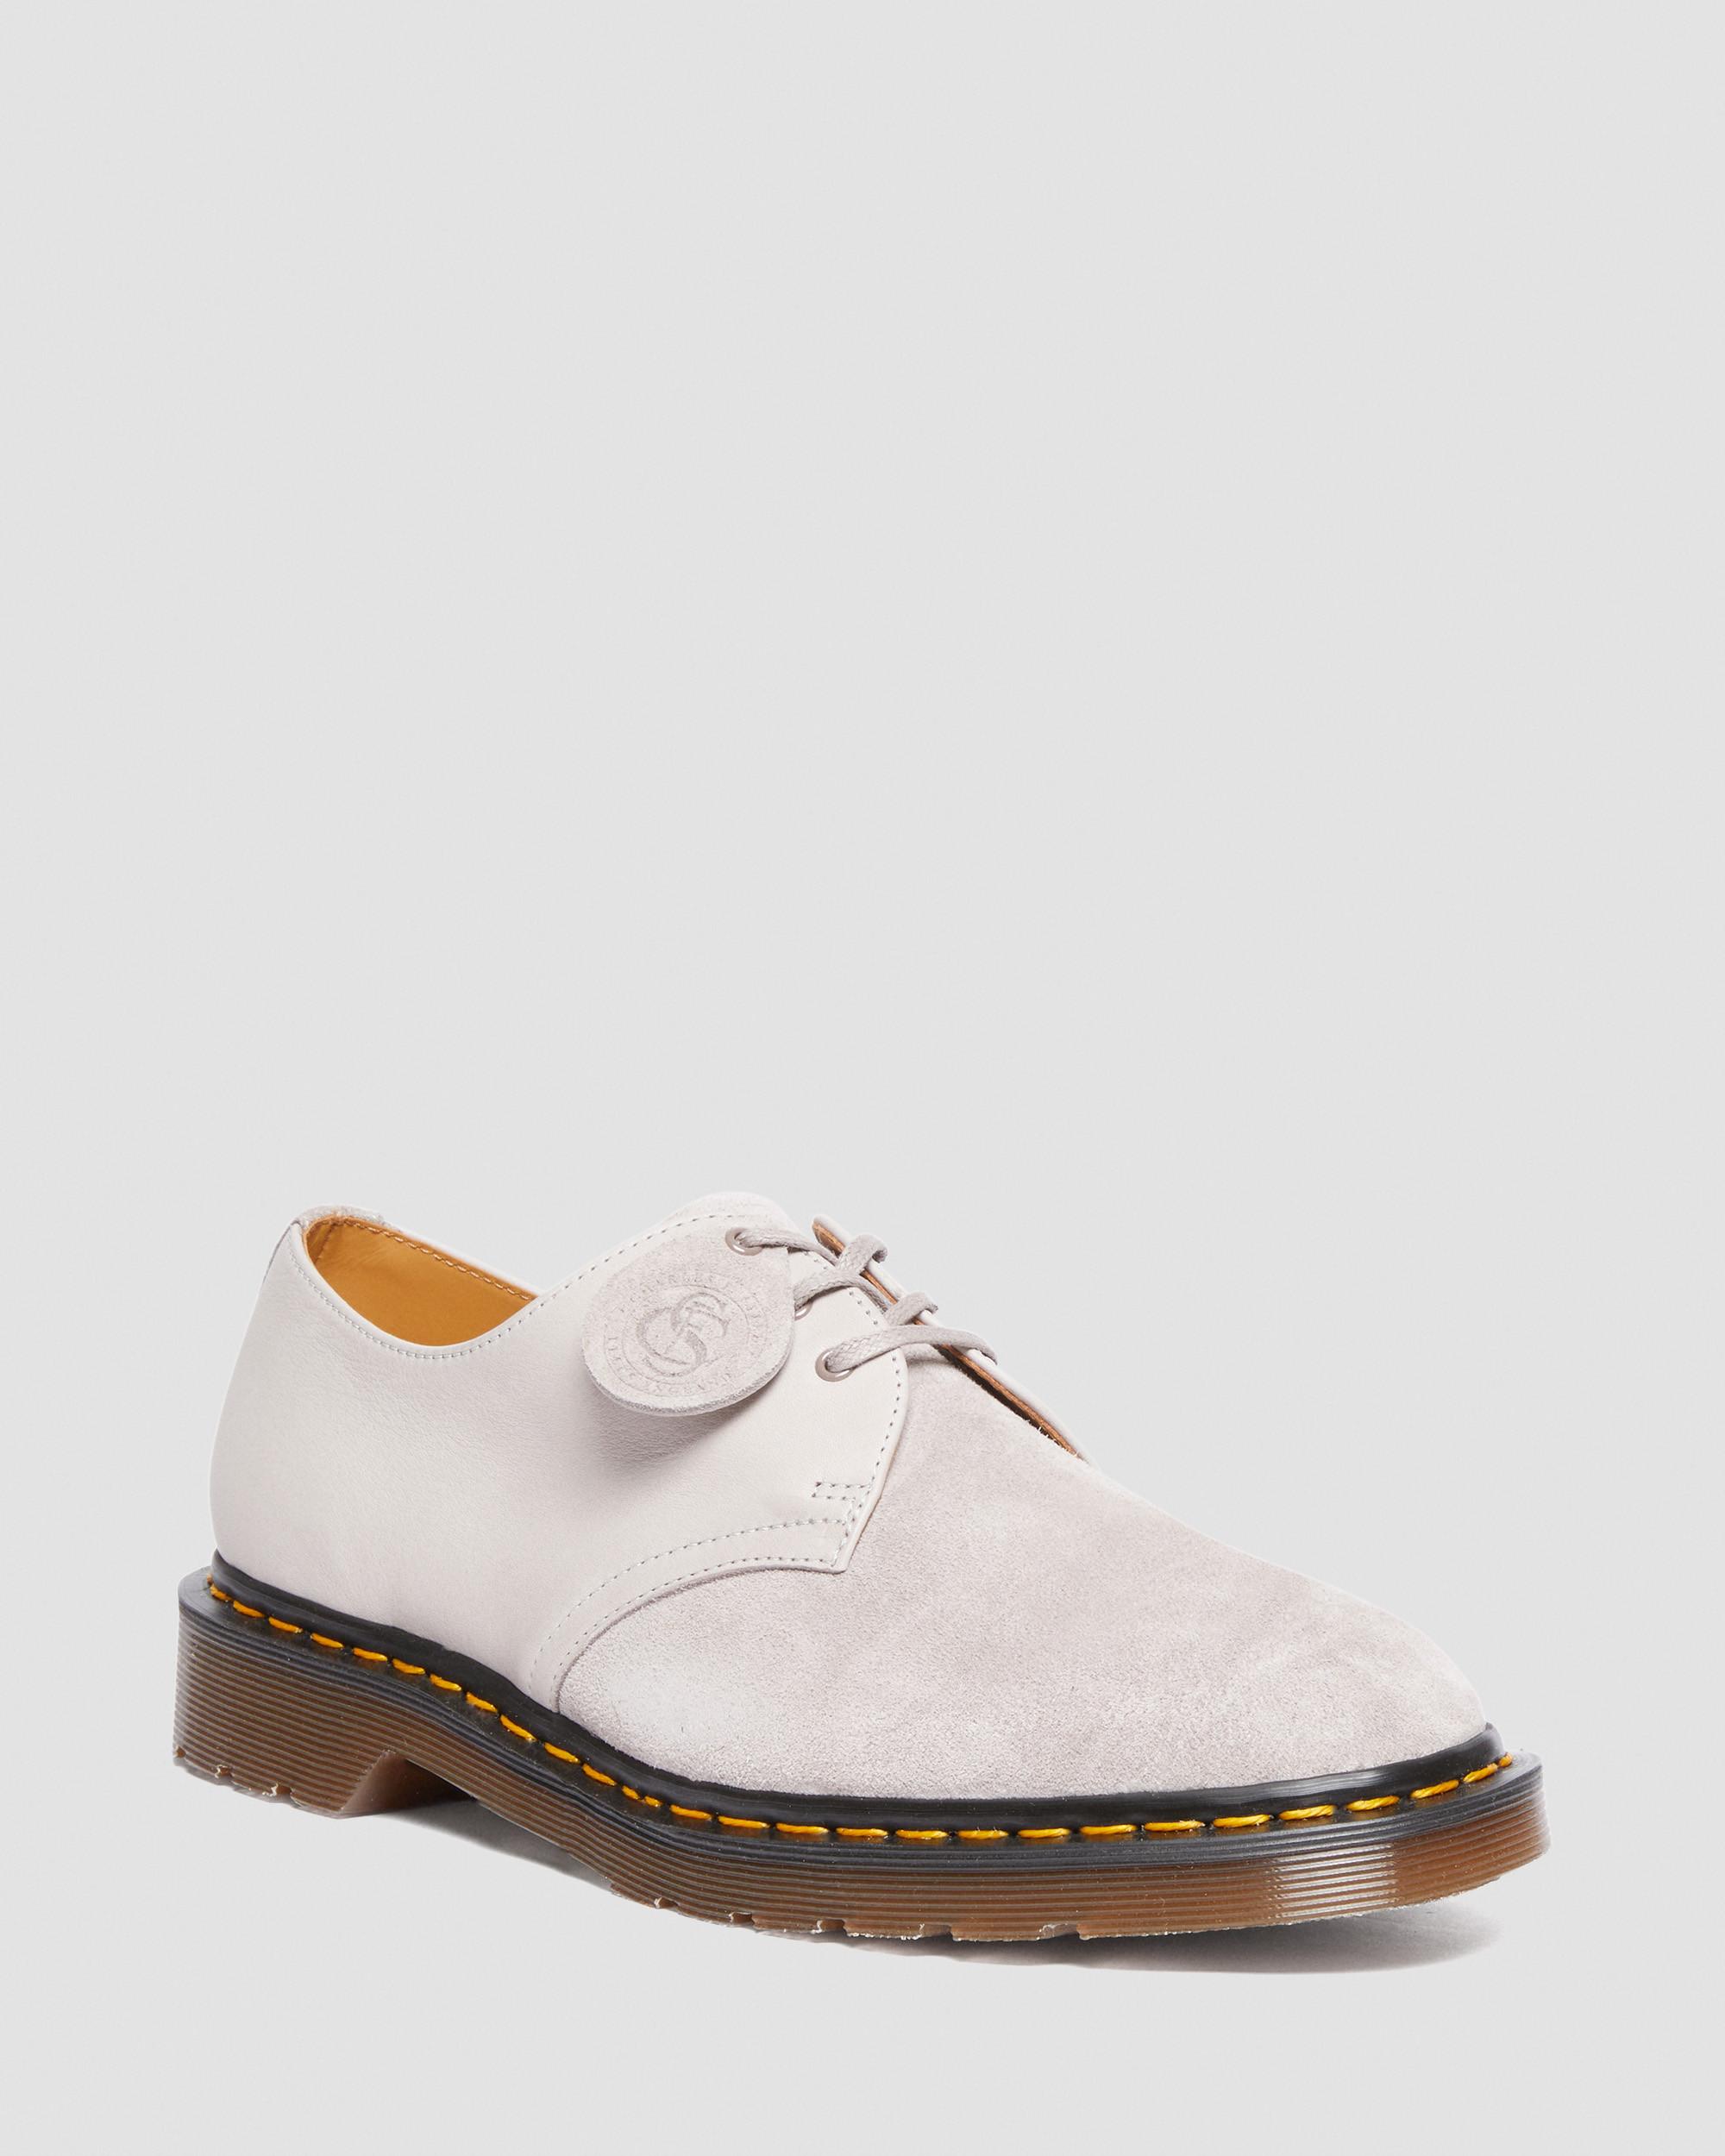 1461 Made in England Suede Oxford Shoes | Dr. Martens